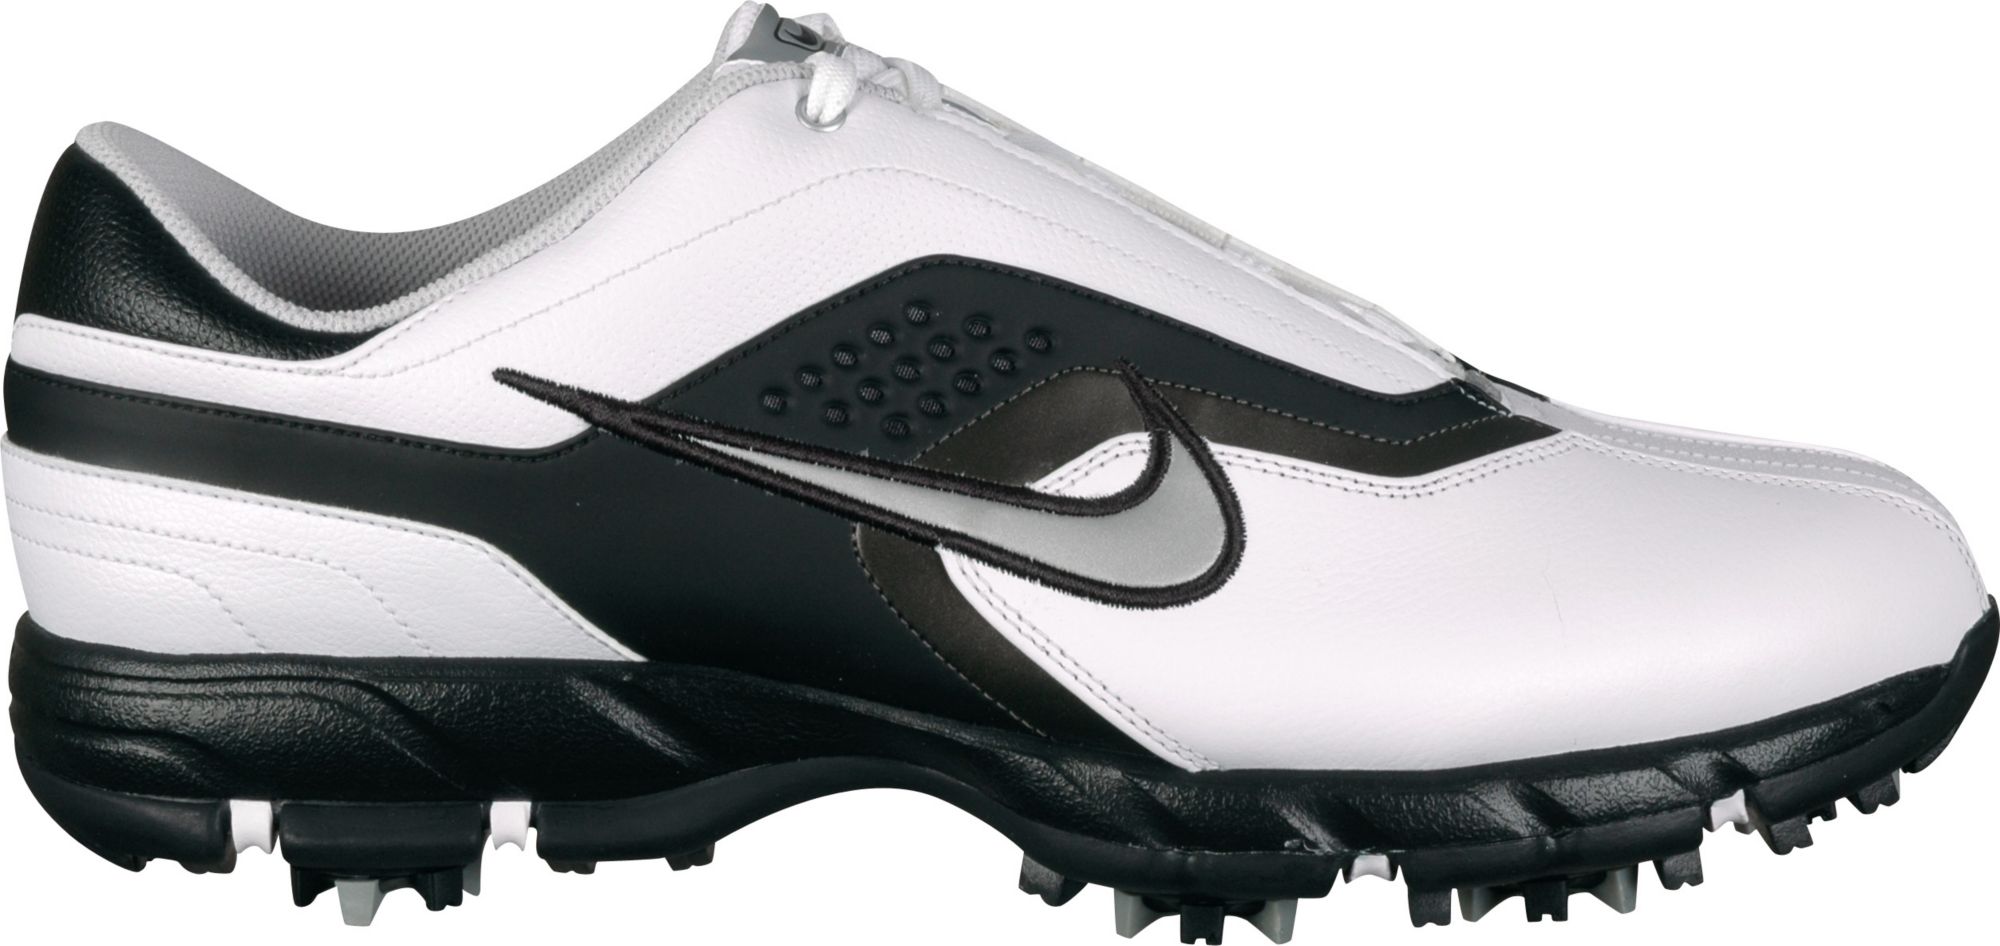 Golf Shoes Size on Golf Shoes   Nike Mens Golf Shoes For Sale At Discount Golf Shoe